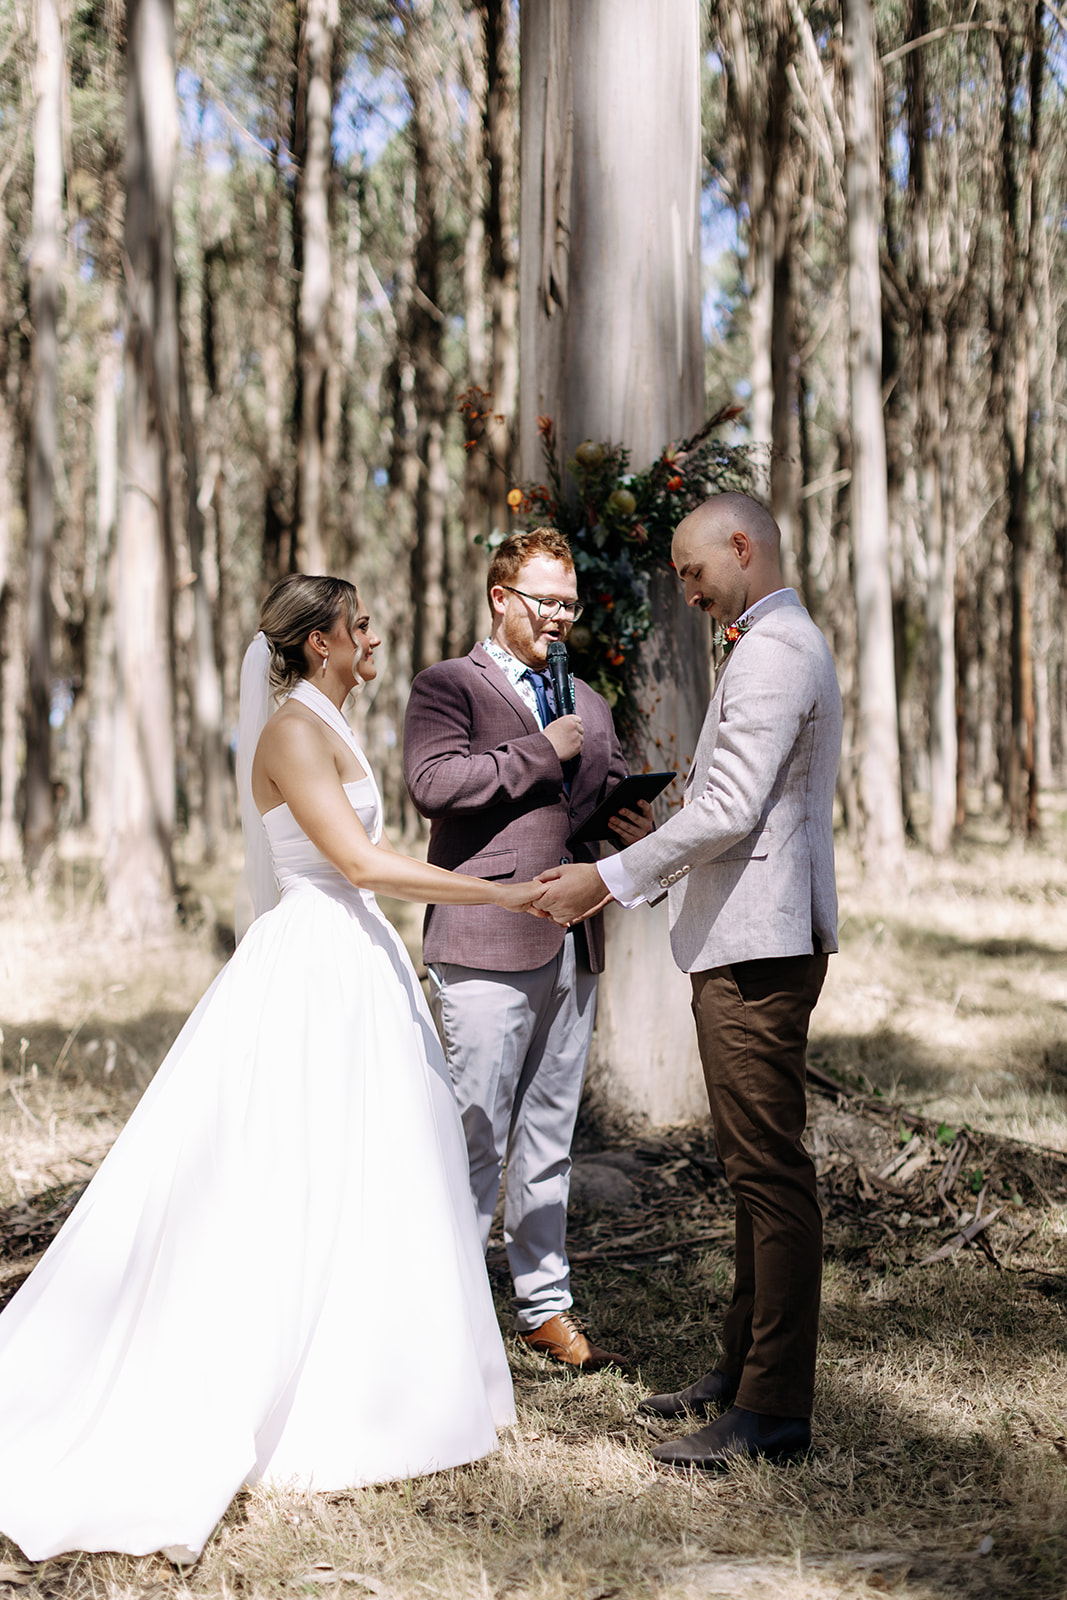 Ryley and Brandan's Bonfire Station Farmstay and Microbrewery Weddings photographed by Weddings by Hayden